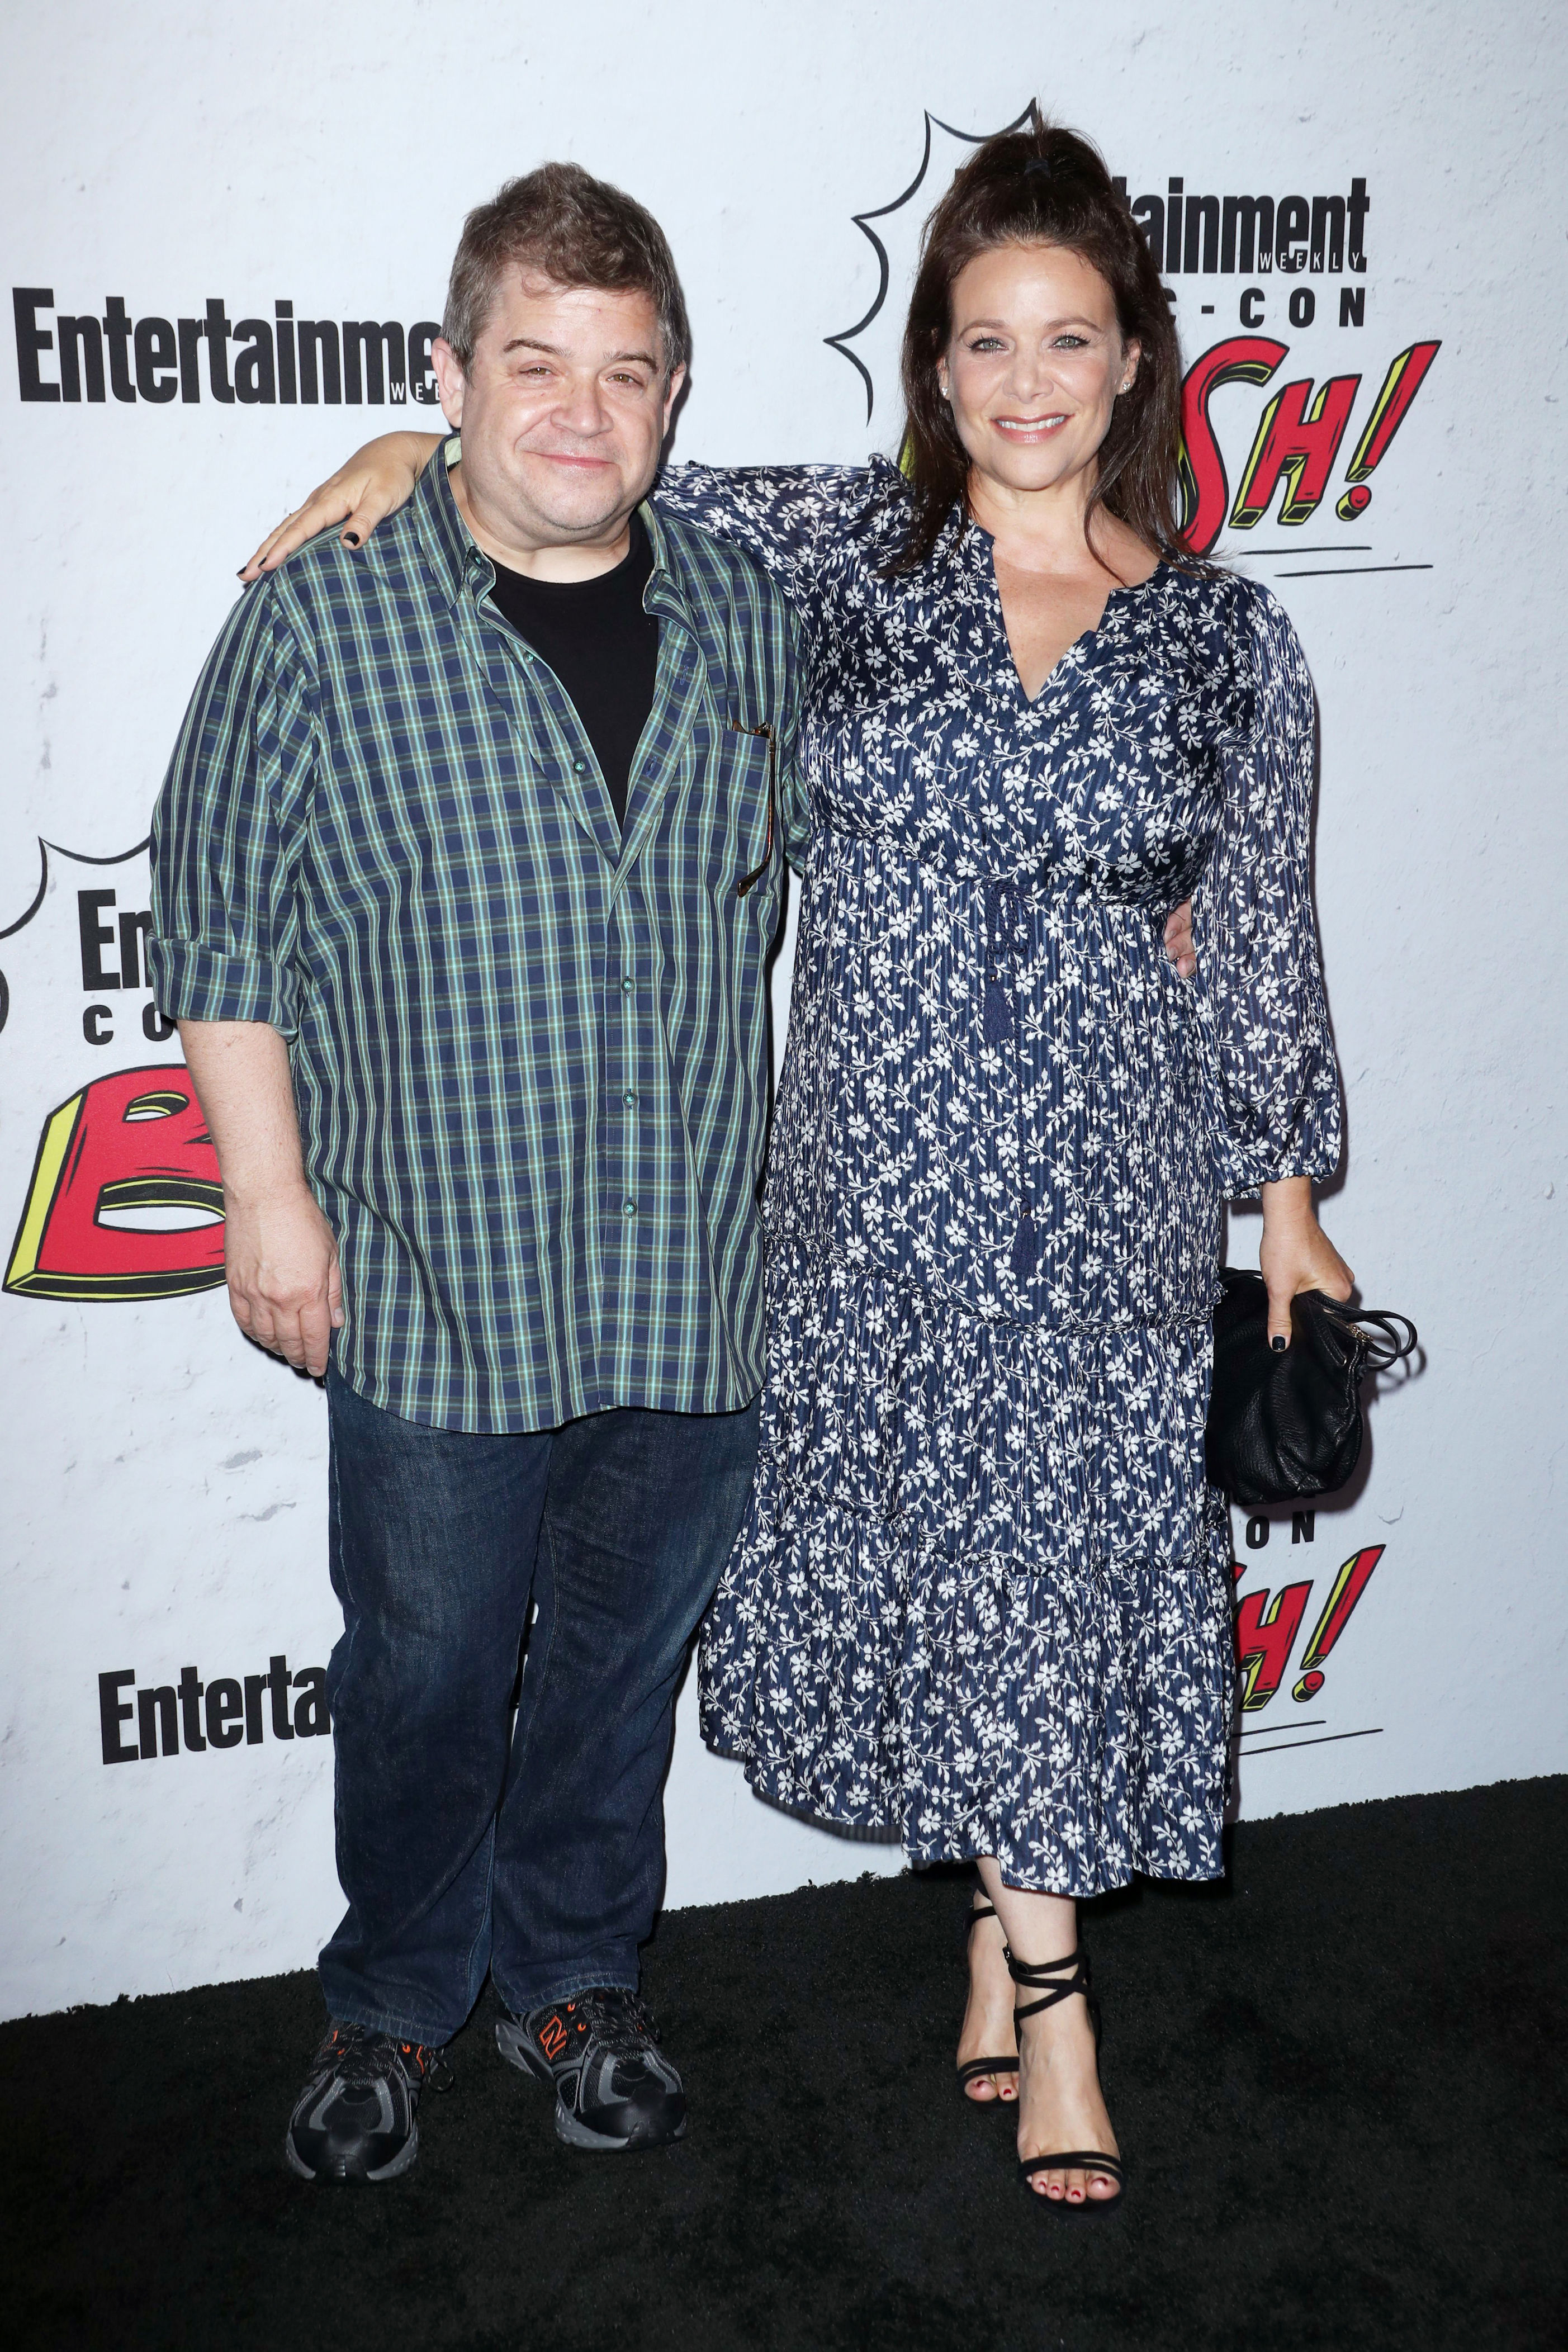 <p>Like many people, comedian Patton Oswalt and actress Meredith Salenger met over social media -- though they had a little help from a famous friend. "We met online... We met because we have a mutual friend, the actress Martha Plimpton, and she threw a dinner party and she invited both of us, neither of us knew each other, we'd never met, and at the last minute I couldn't go because of some travel stuff and so the next day -- we have all these mutual friends on Facebook -- Meredith sent me a message saying, 'You missed some amazing lasagna last night, dude.' That was on Feb. 28 [when] we started talking," Patton recalled during a November 2017 appearance on "Jimmy Kimmel Live!" "We didn't meet face to face until May 20." Patton -- whose first wife, crime writer Michelle McNamara, unexpectedly died in April 2016 -- explained how he fell for Meredith long before they actually met. "It was very Victorian-like, exchanging-letters kind of romance. Like every night we would just write back and forth about everything -- life and politics and books -- we did all of the deep stuff you do after you have the first date. So by the time we met on our first date I was so head over heels." He moved fast after that: Patton <a href="https://www.wonderwall.com/news/icymi-celeb-news-july-2-7-2017-3007733.gallery?photoId=1006107">proposed</a> in July 2017 and the pair <a href="http://www.wonderwall.com/news/patton-oswalt-marries-meredith-salenger-19-months-after-first-wifes-unexpected-death-3010402.article">got married</a> on Nov. 4 at Jim Henson Studios.</p>